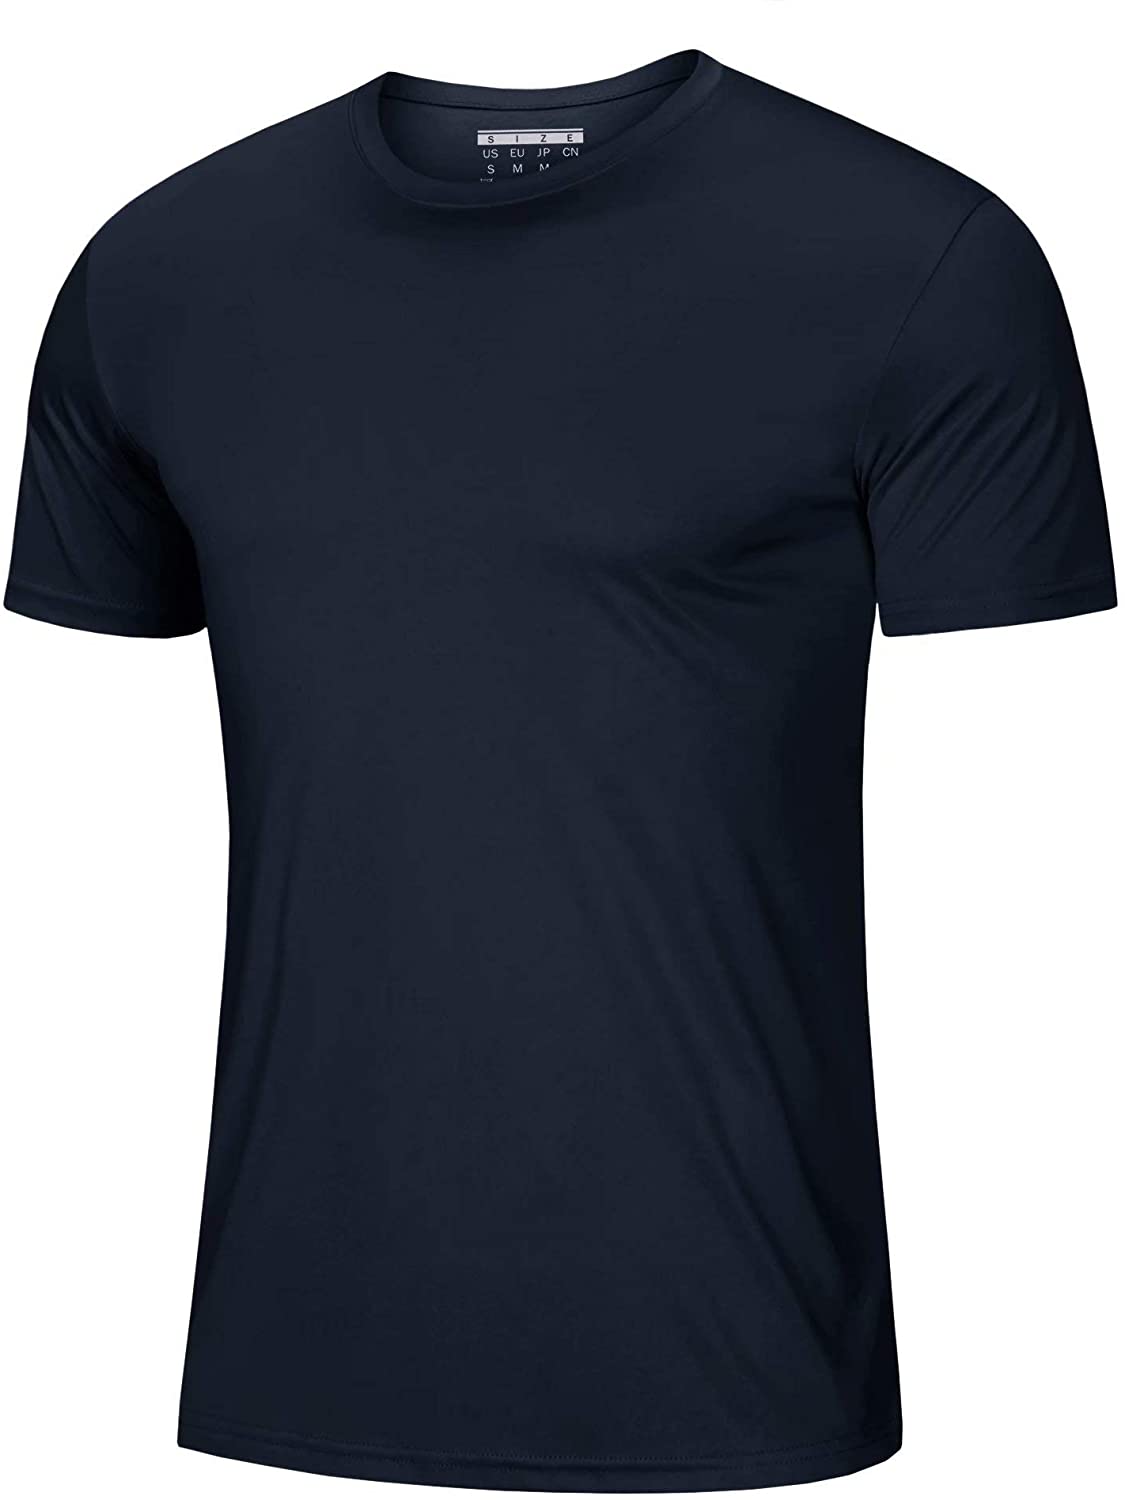 MAGCOMSEN Men's Short Sleeve T-Shirt Quick Dry UPF 50 Athletic Running Workout Fishing Top Tee Performance Shirts